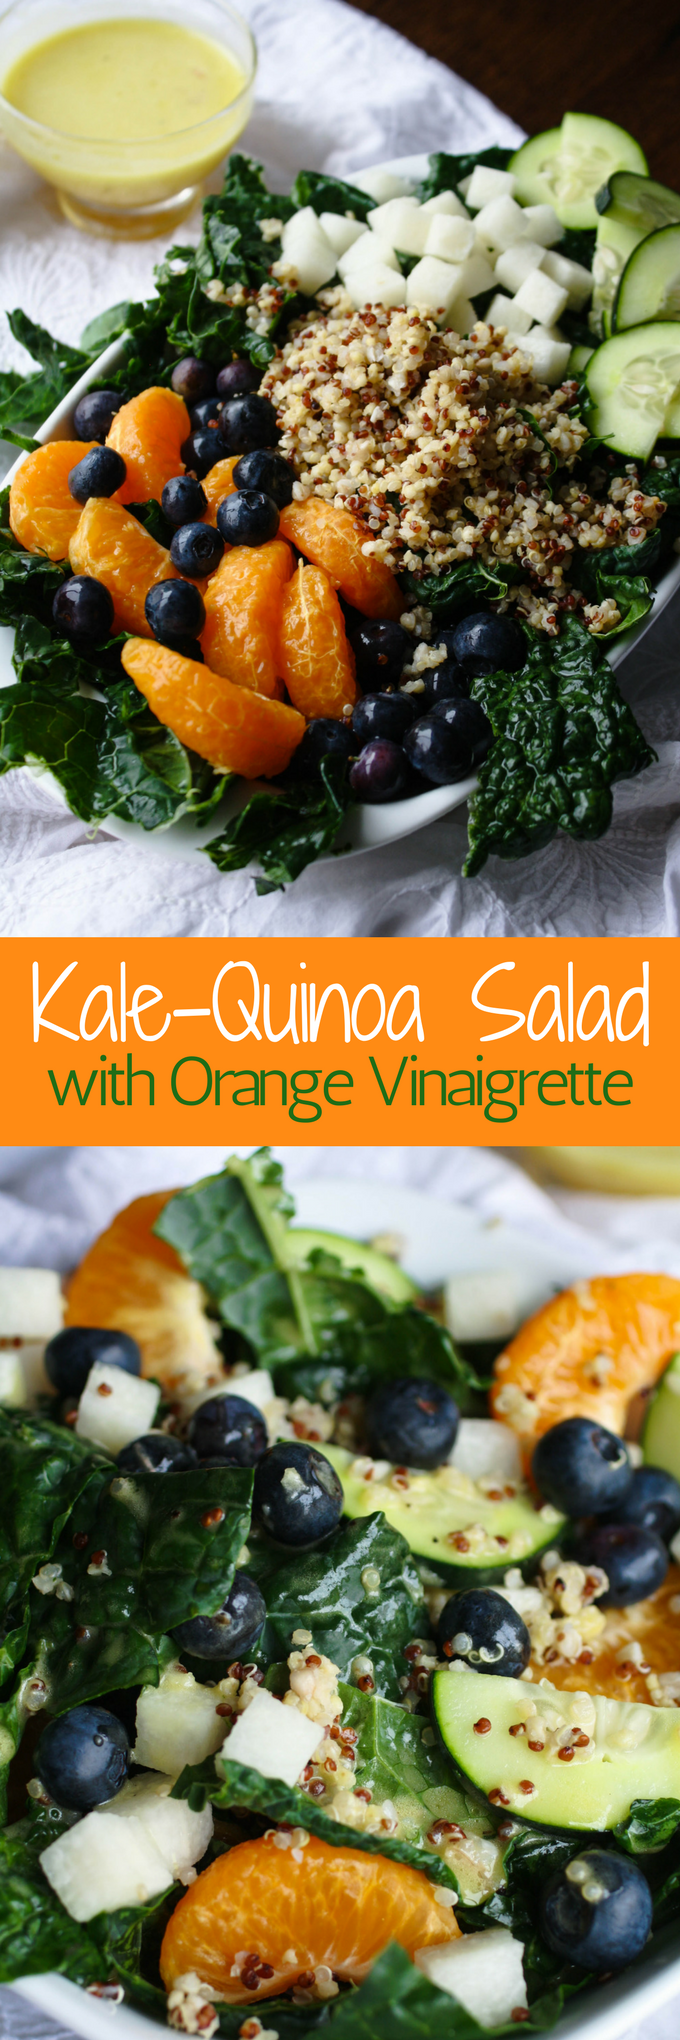 Kale-Quinoa Salad with Orange Vinaigrette is a fabulous salad filled with all sorts of goodies. You'll love the dressing, too!